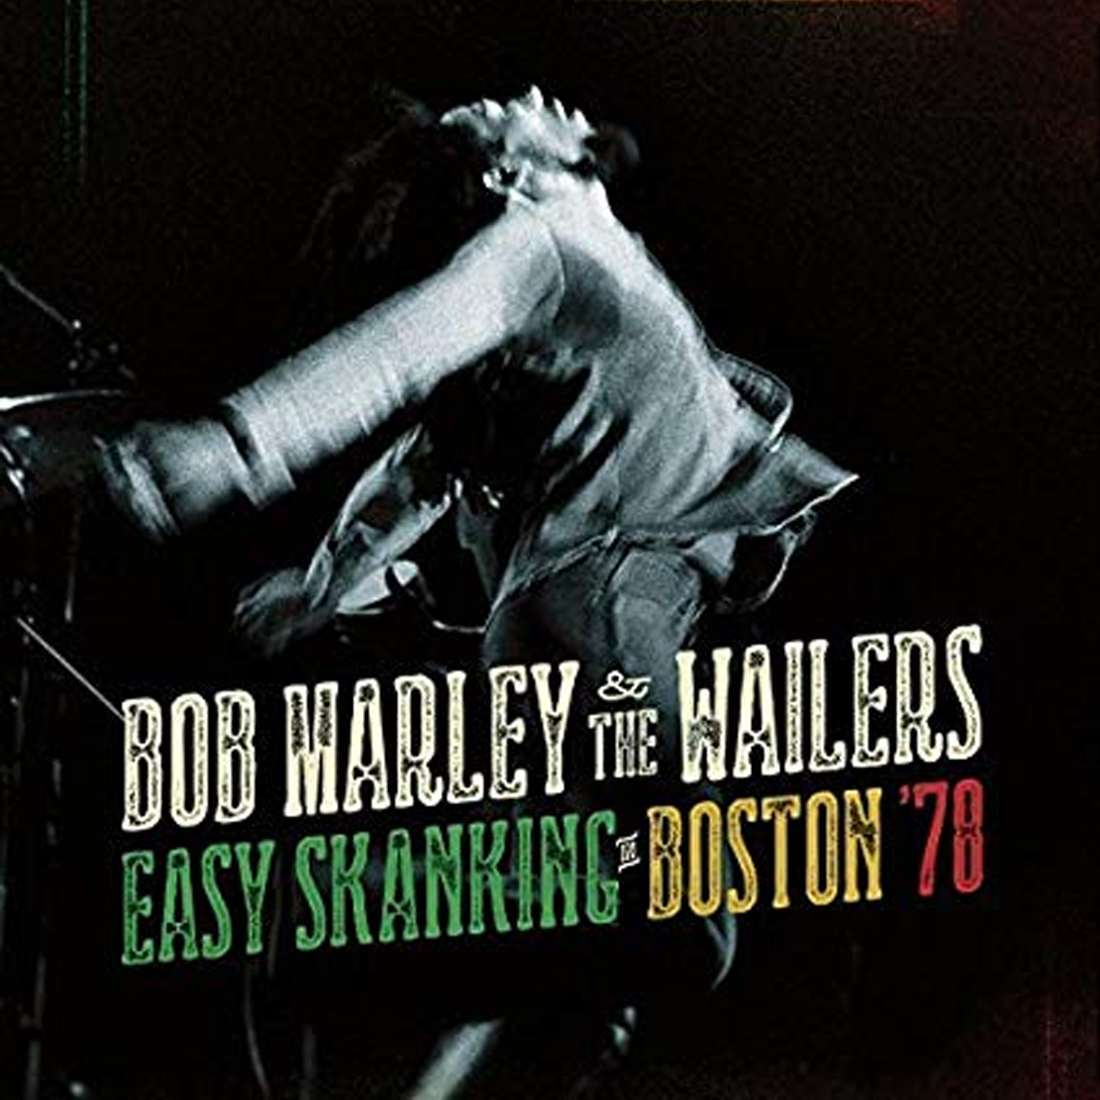 Bob Marley and The Wailers - Easy Skanking In Boston 78 2LP